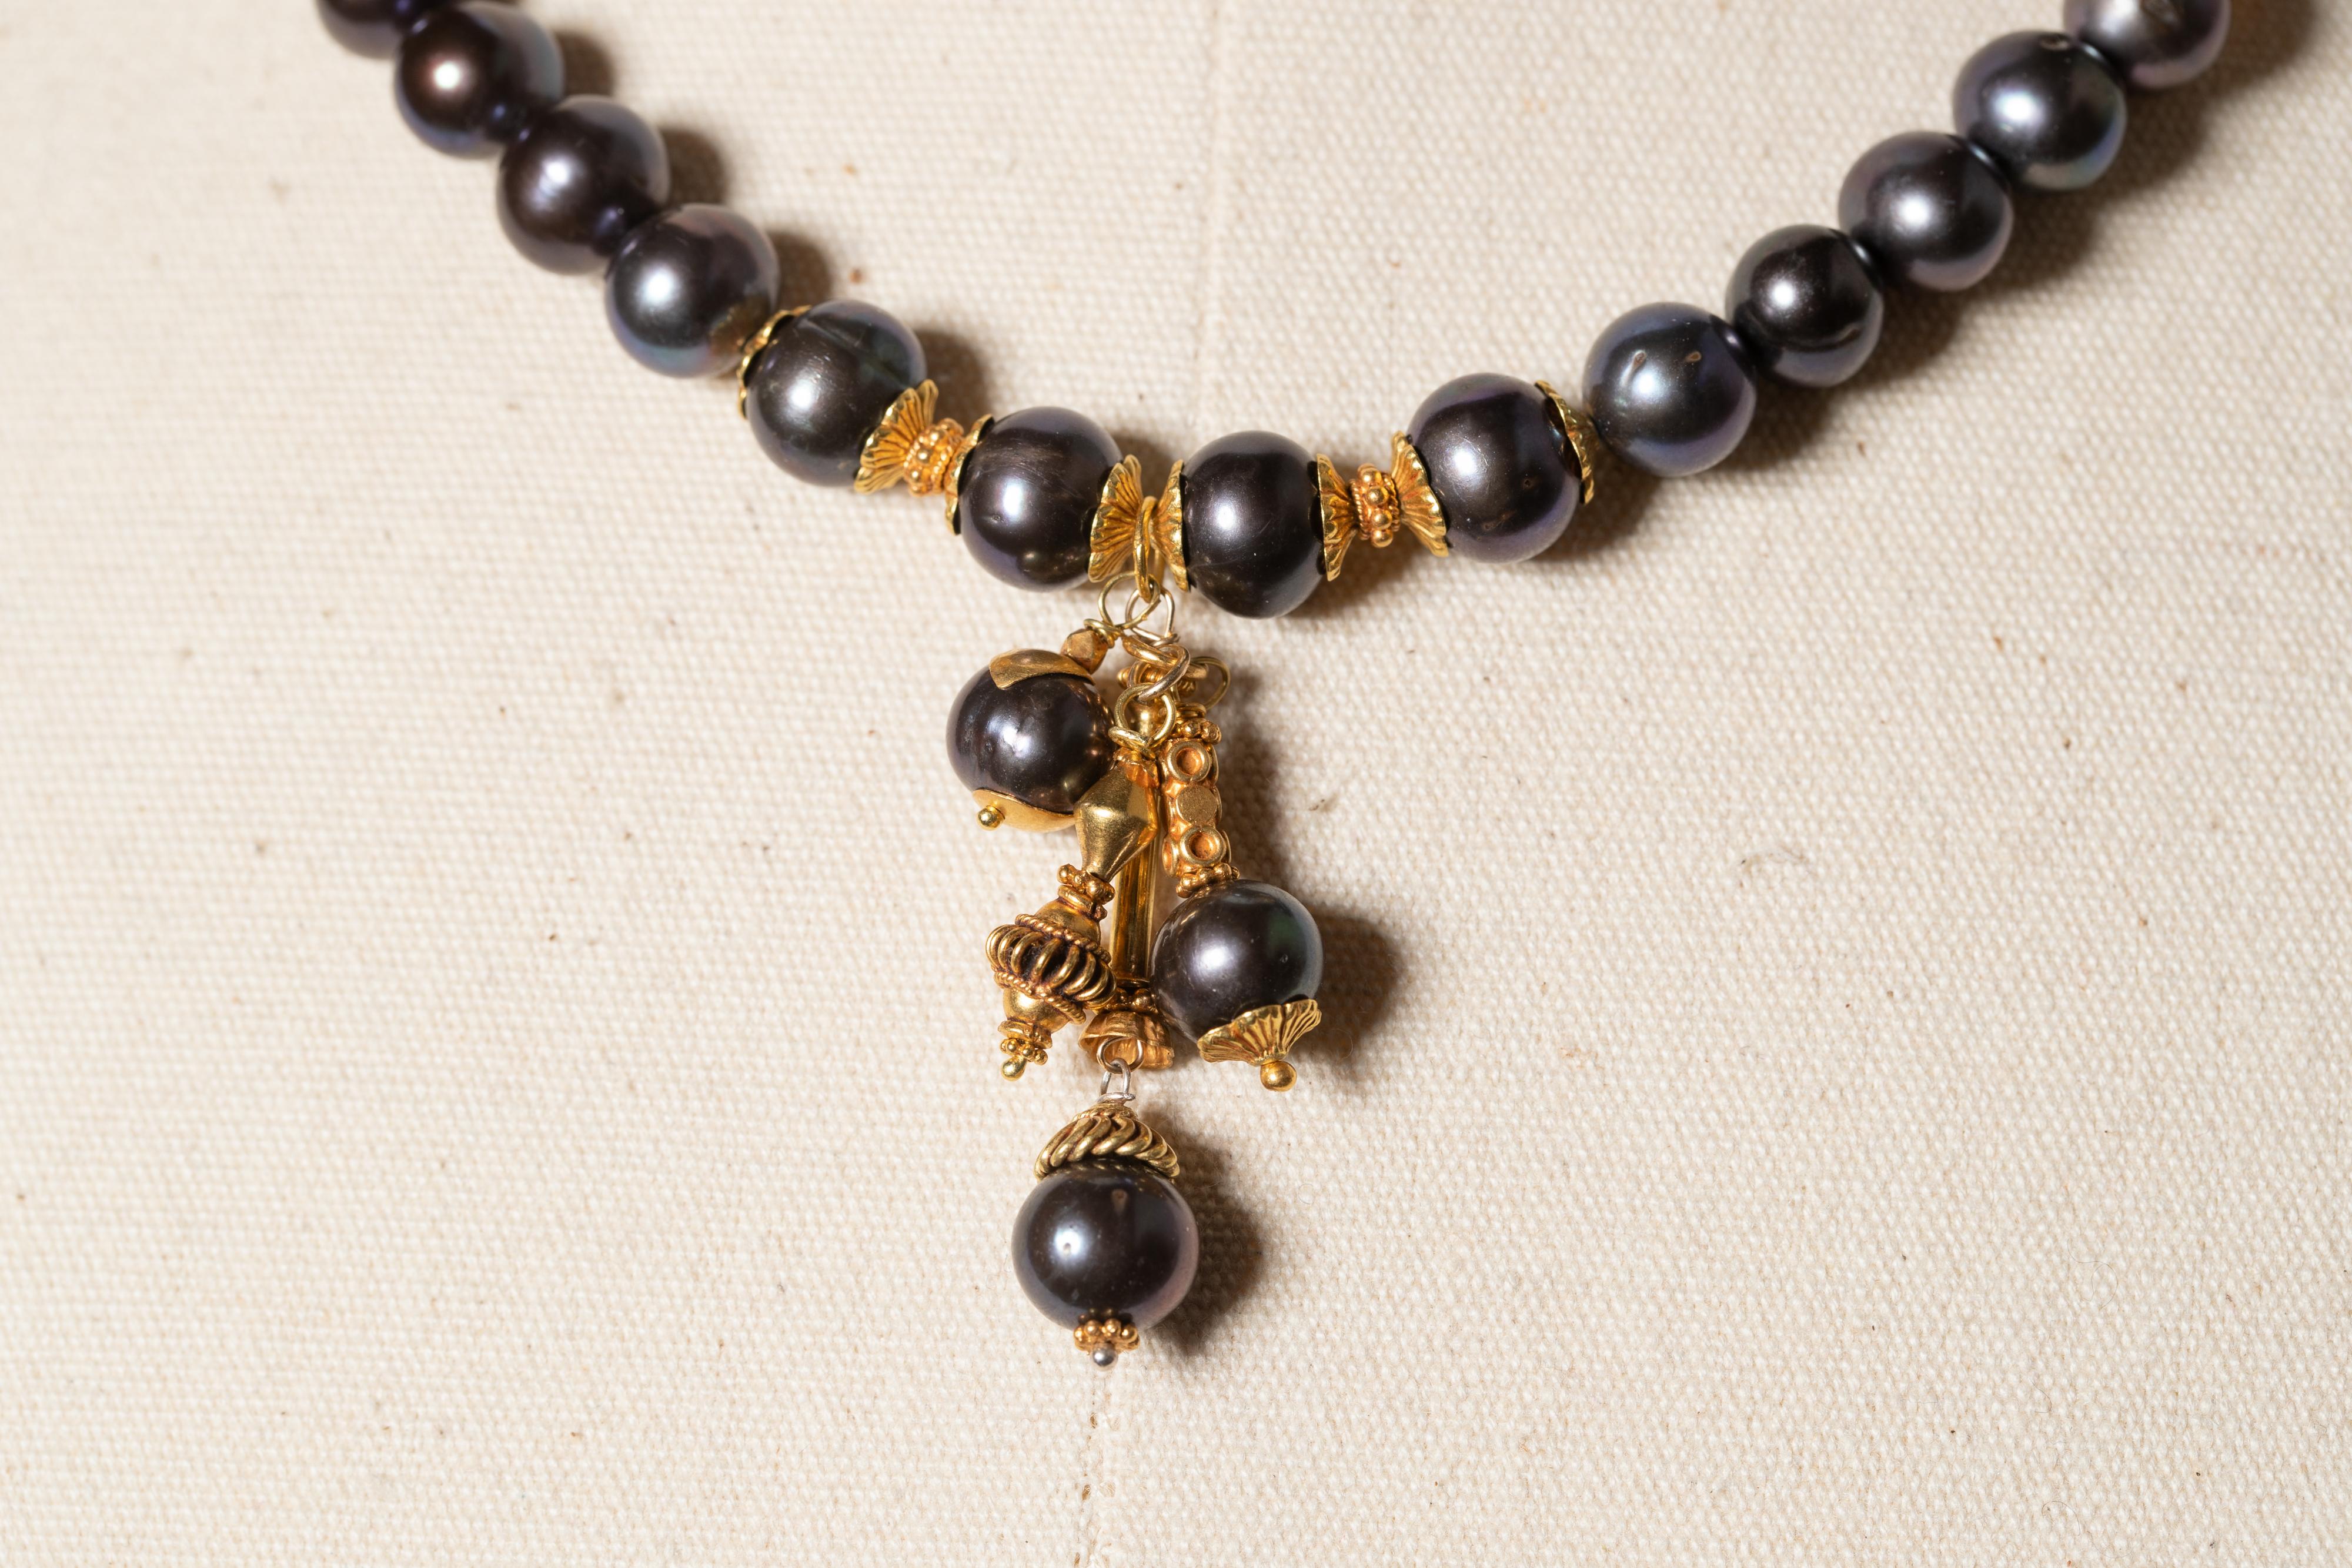 Round 9mm Tahitian pearls with 22K gold and a cluster of pearls and gold drops at the center, by Deborah Lockhart Phillips.  Pearl clasp at the back.  Just the drop portion of the necklace measures 1.5